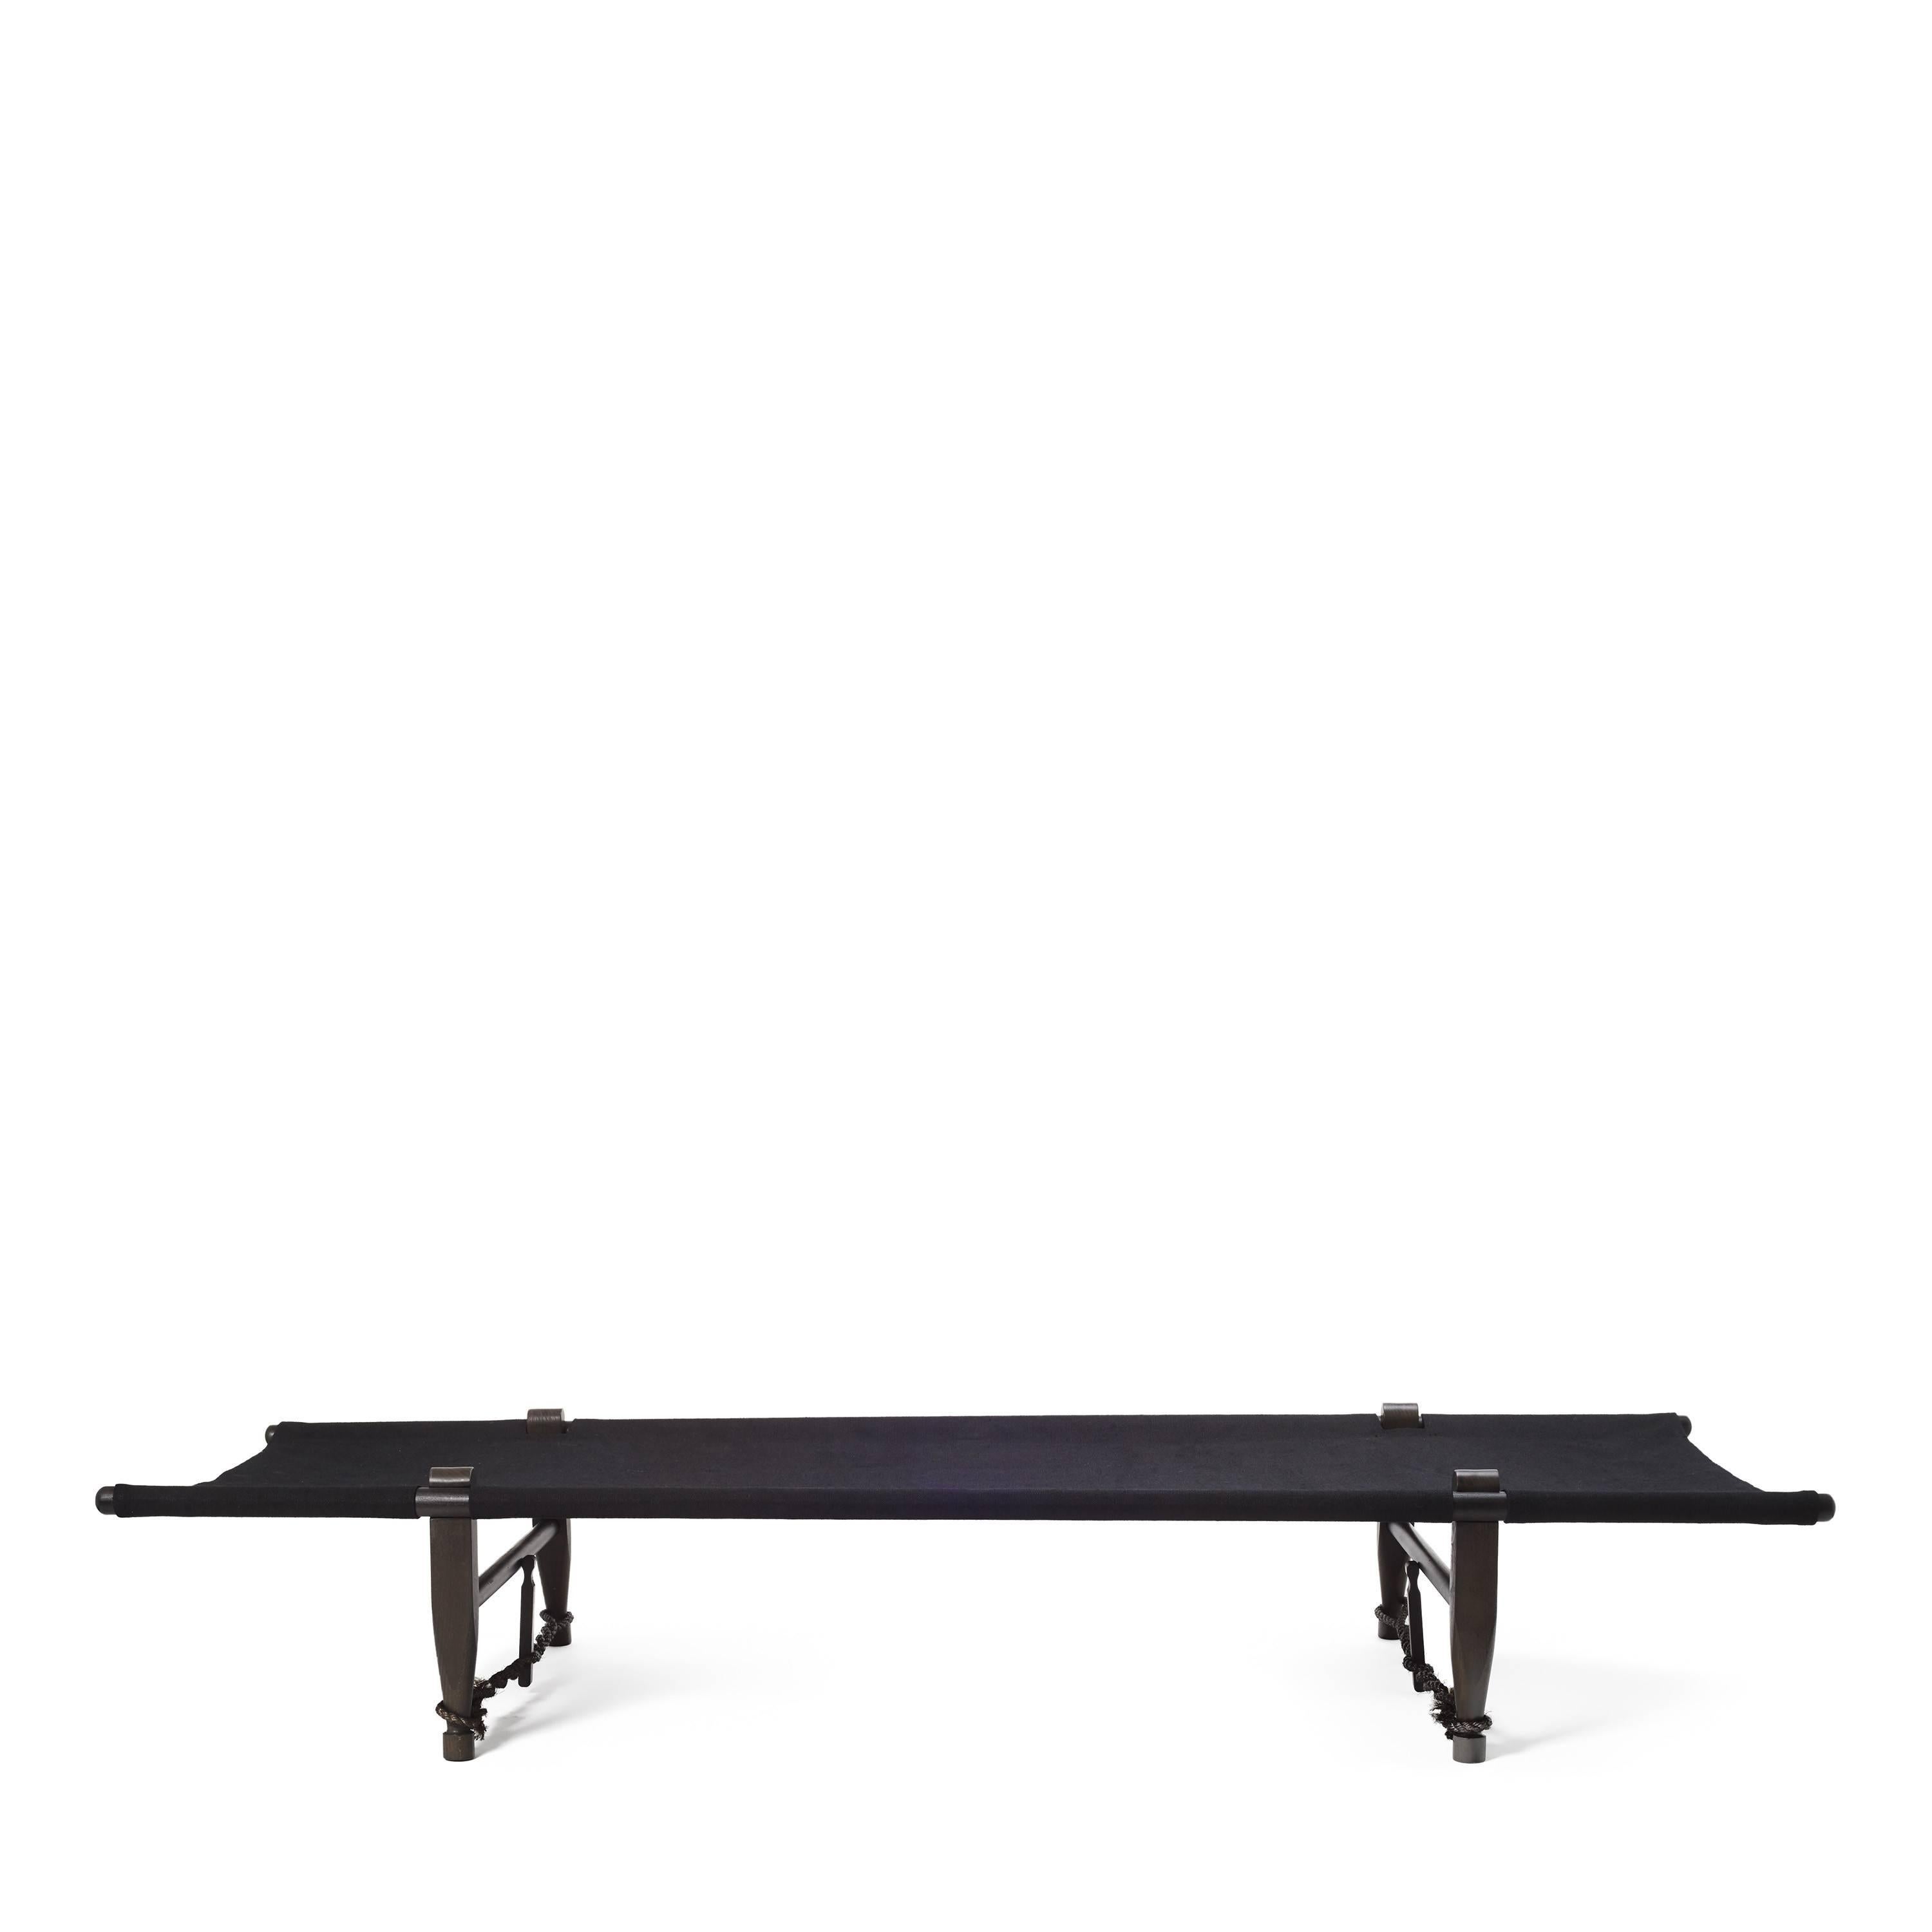 Designed in 1962 by Ole Gjerløv-Knudsen, this OGK black daybed is portable, light, comfortable, and fully functions as a coffee table by day and a place of rest at night. Made of black stained beech wood, black natural linen cover, and black sisal